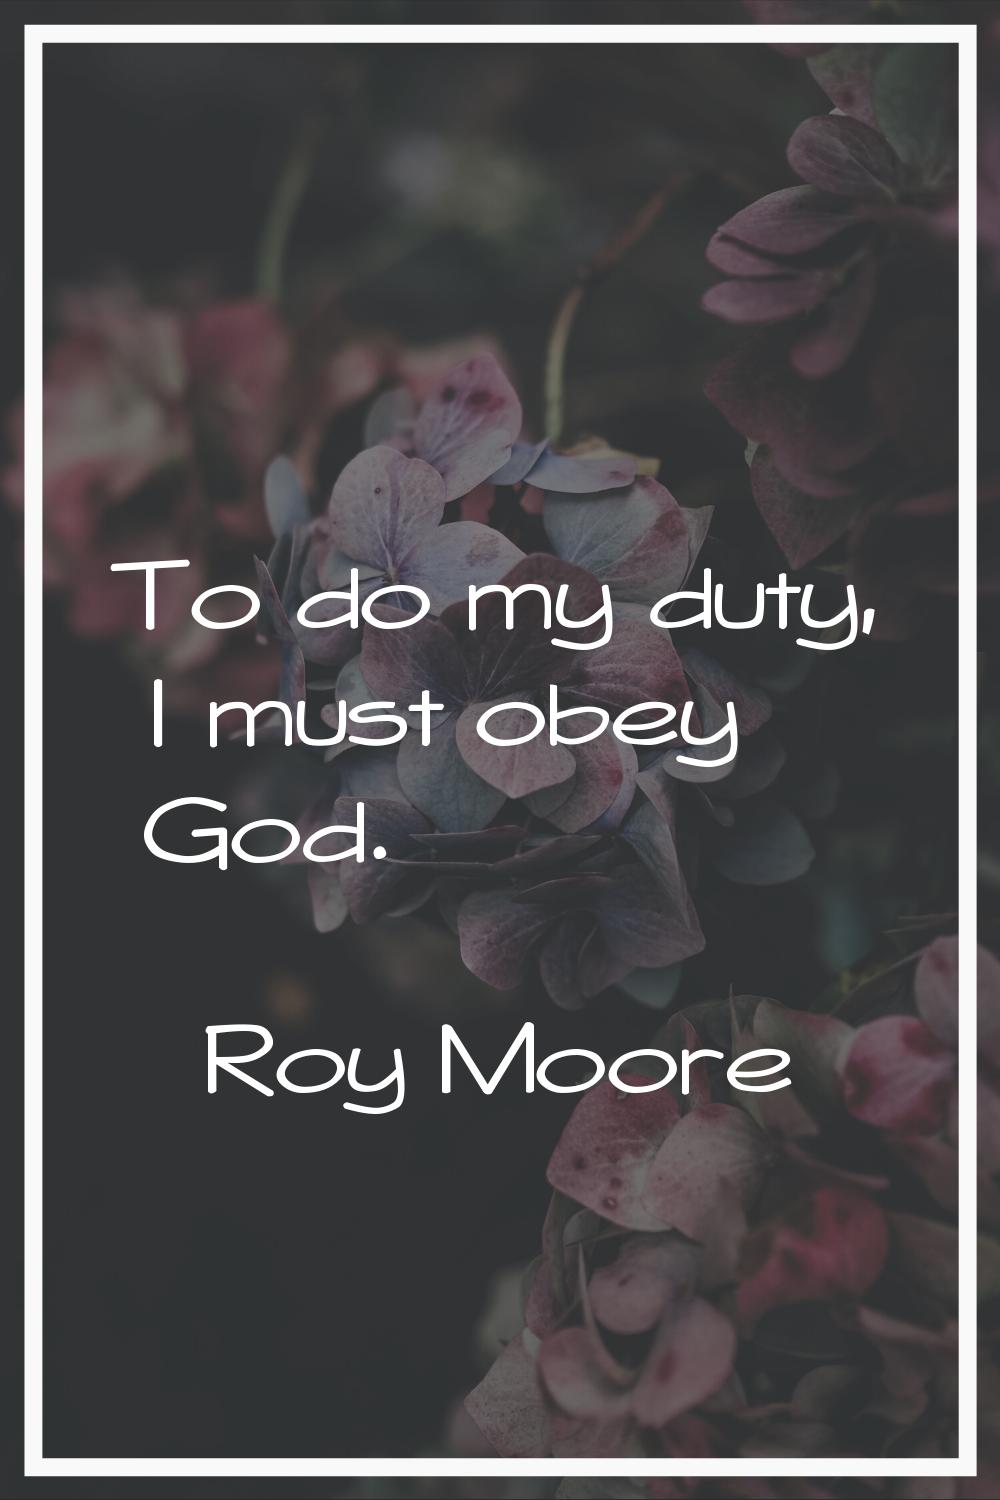 To do my duty, I must obey God.